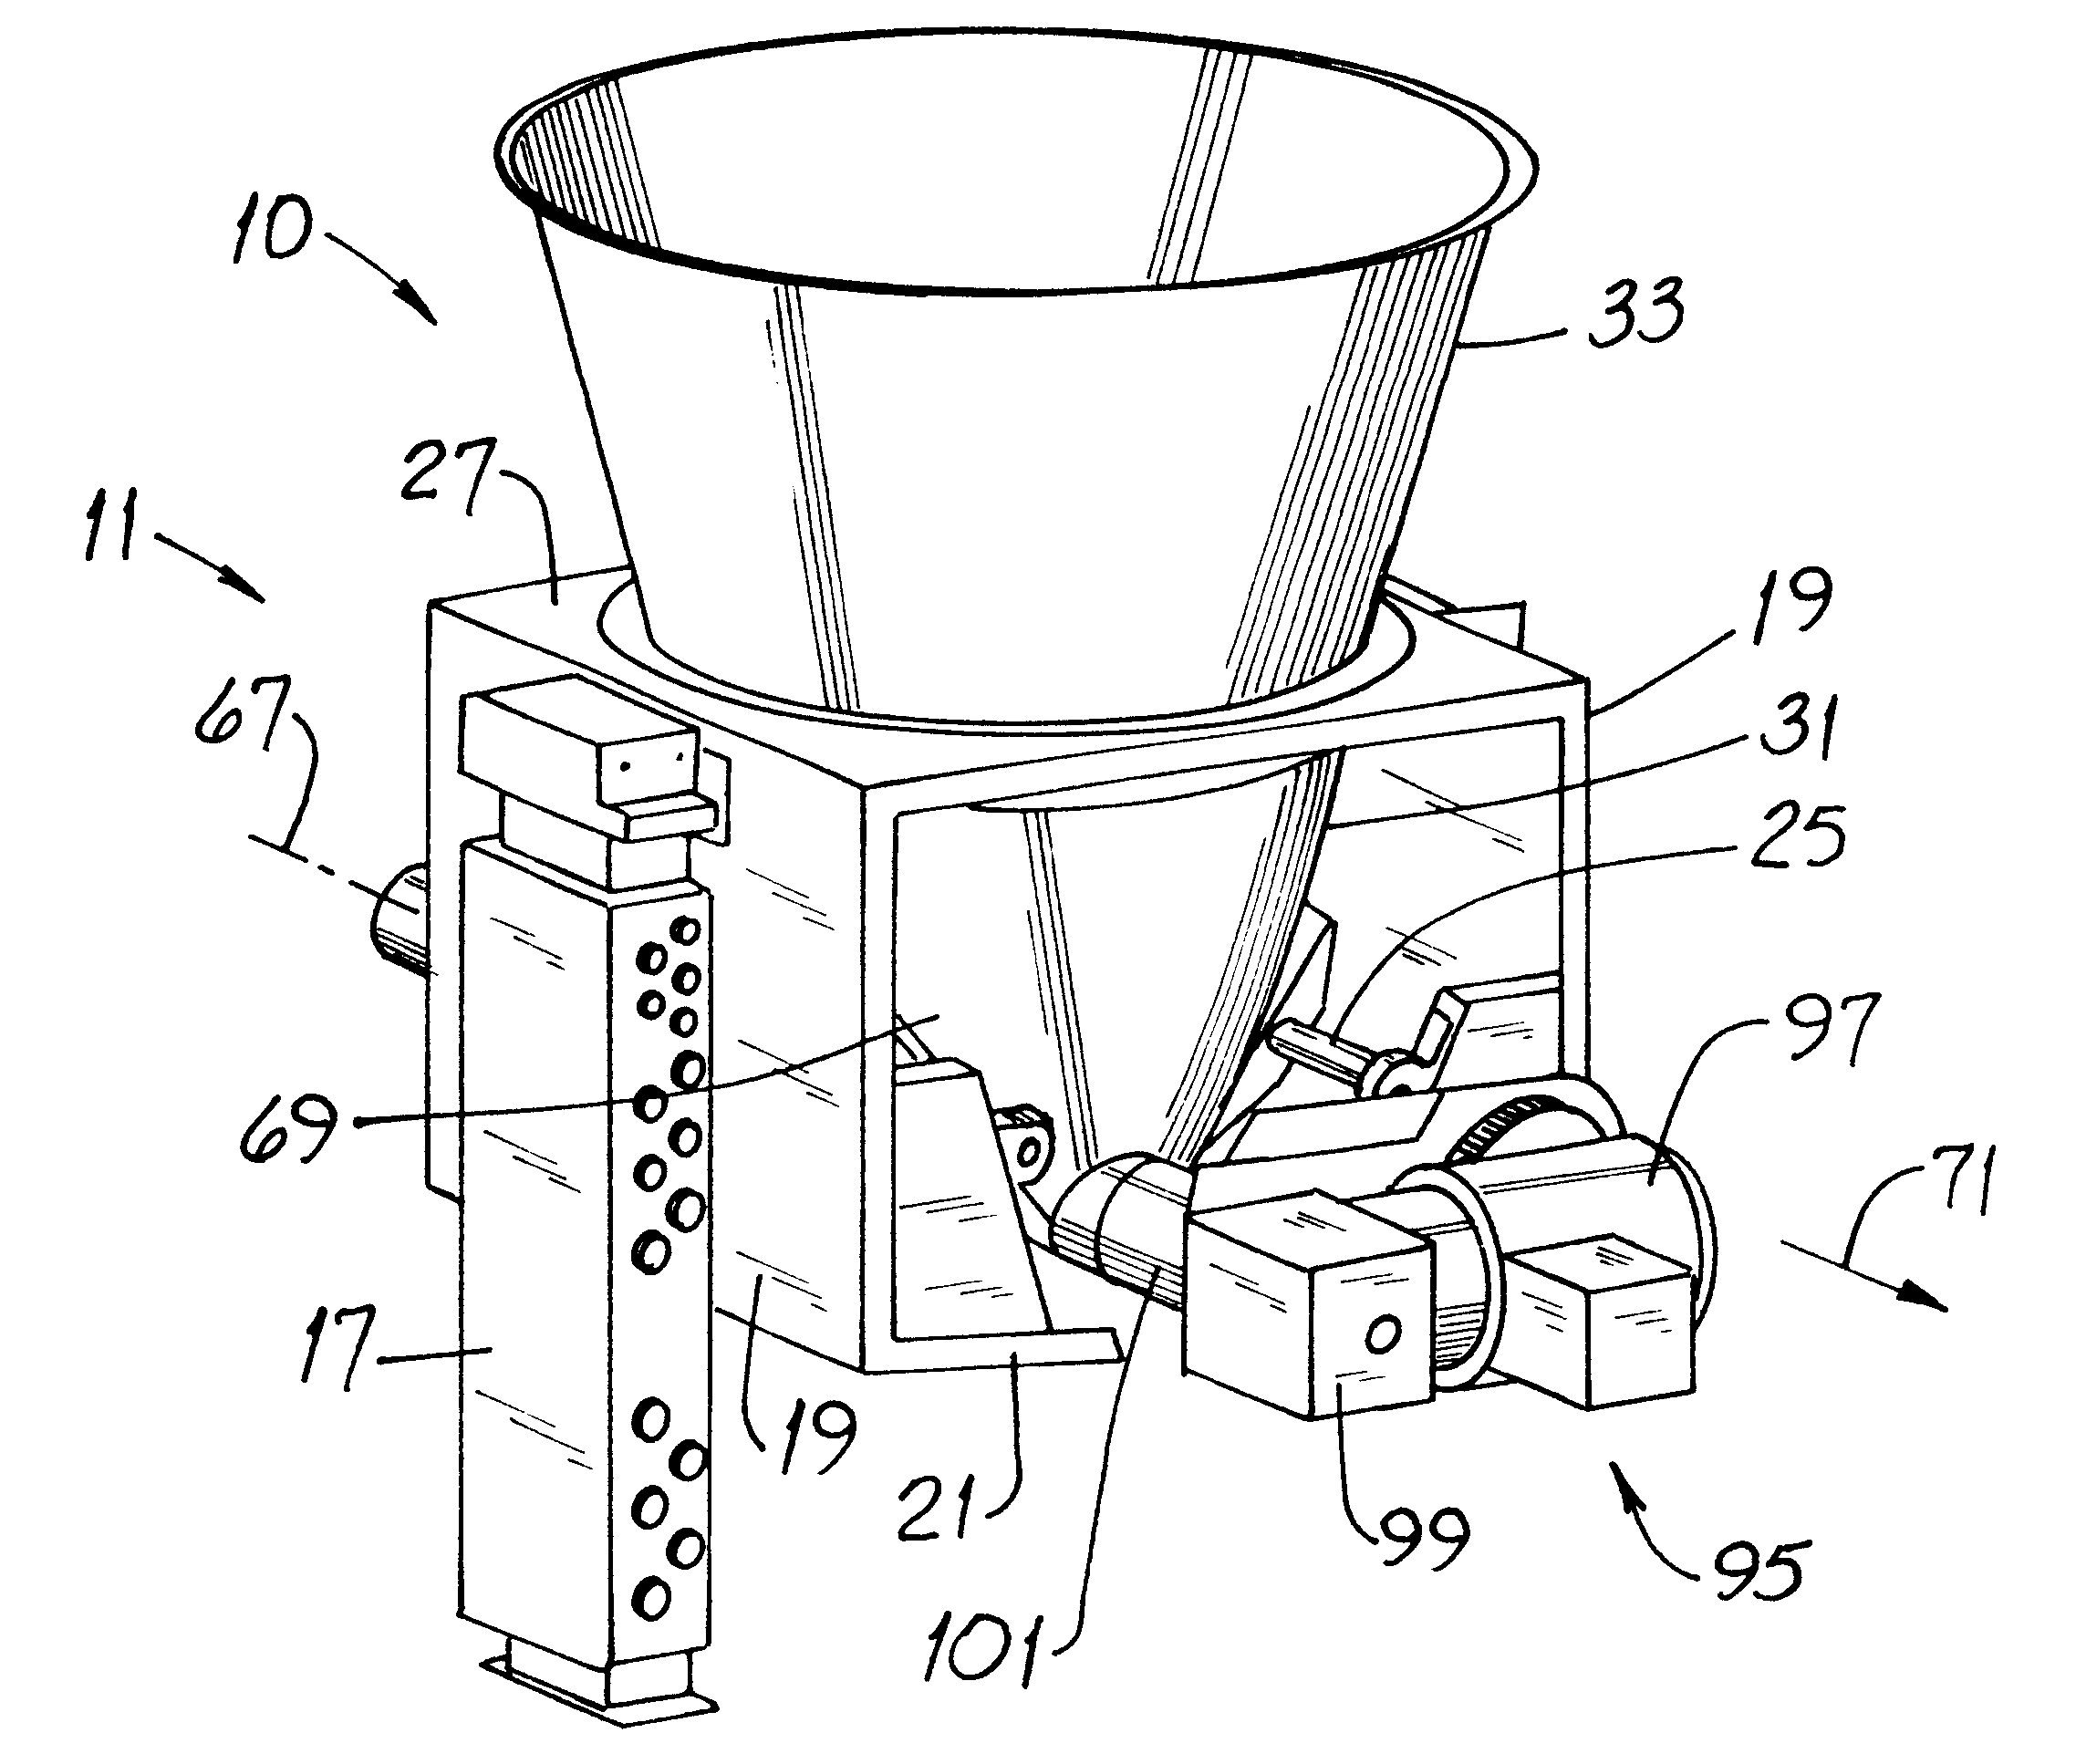 Bulk-solid metering system with laterally removable feed hopper